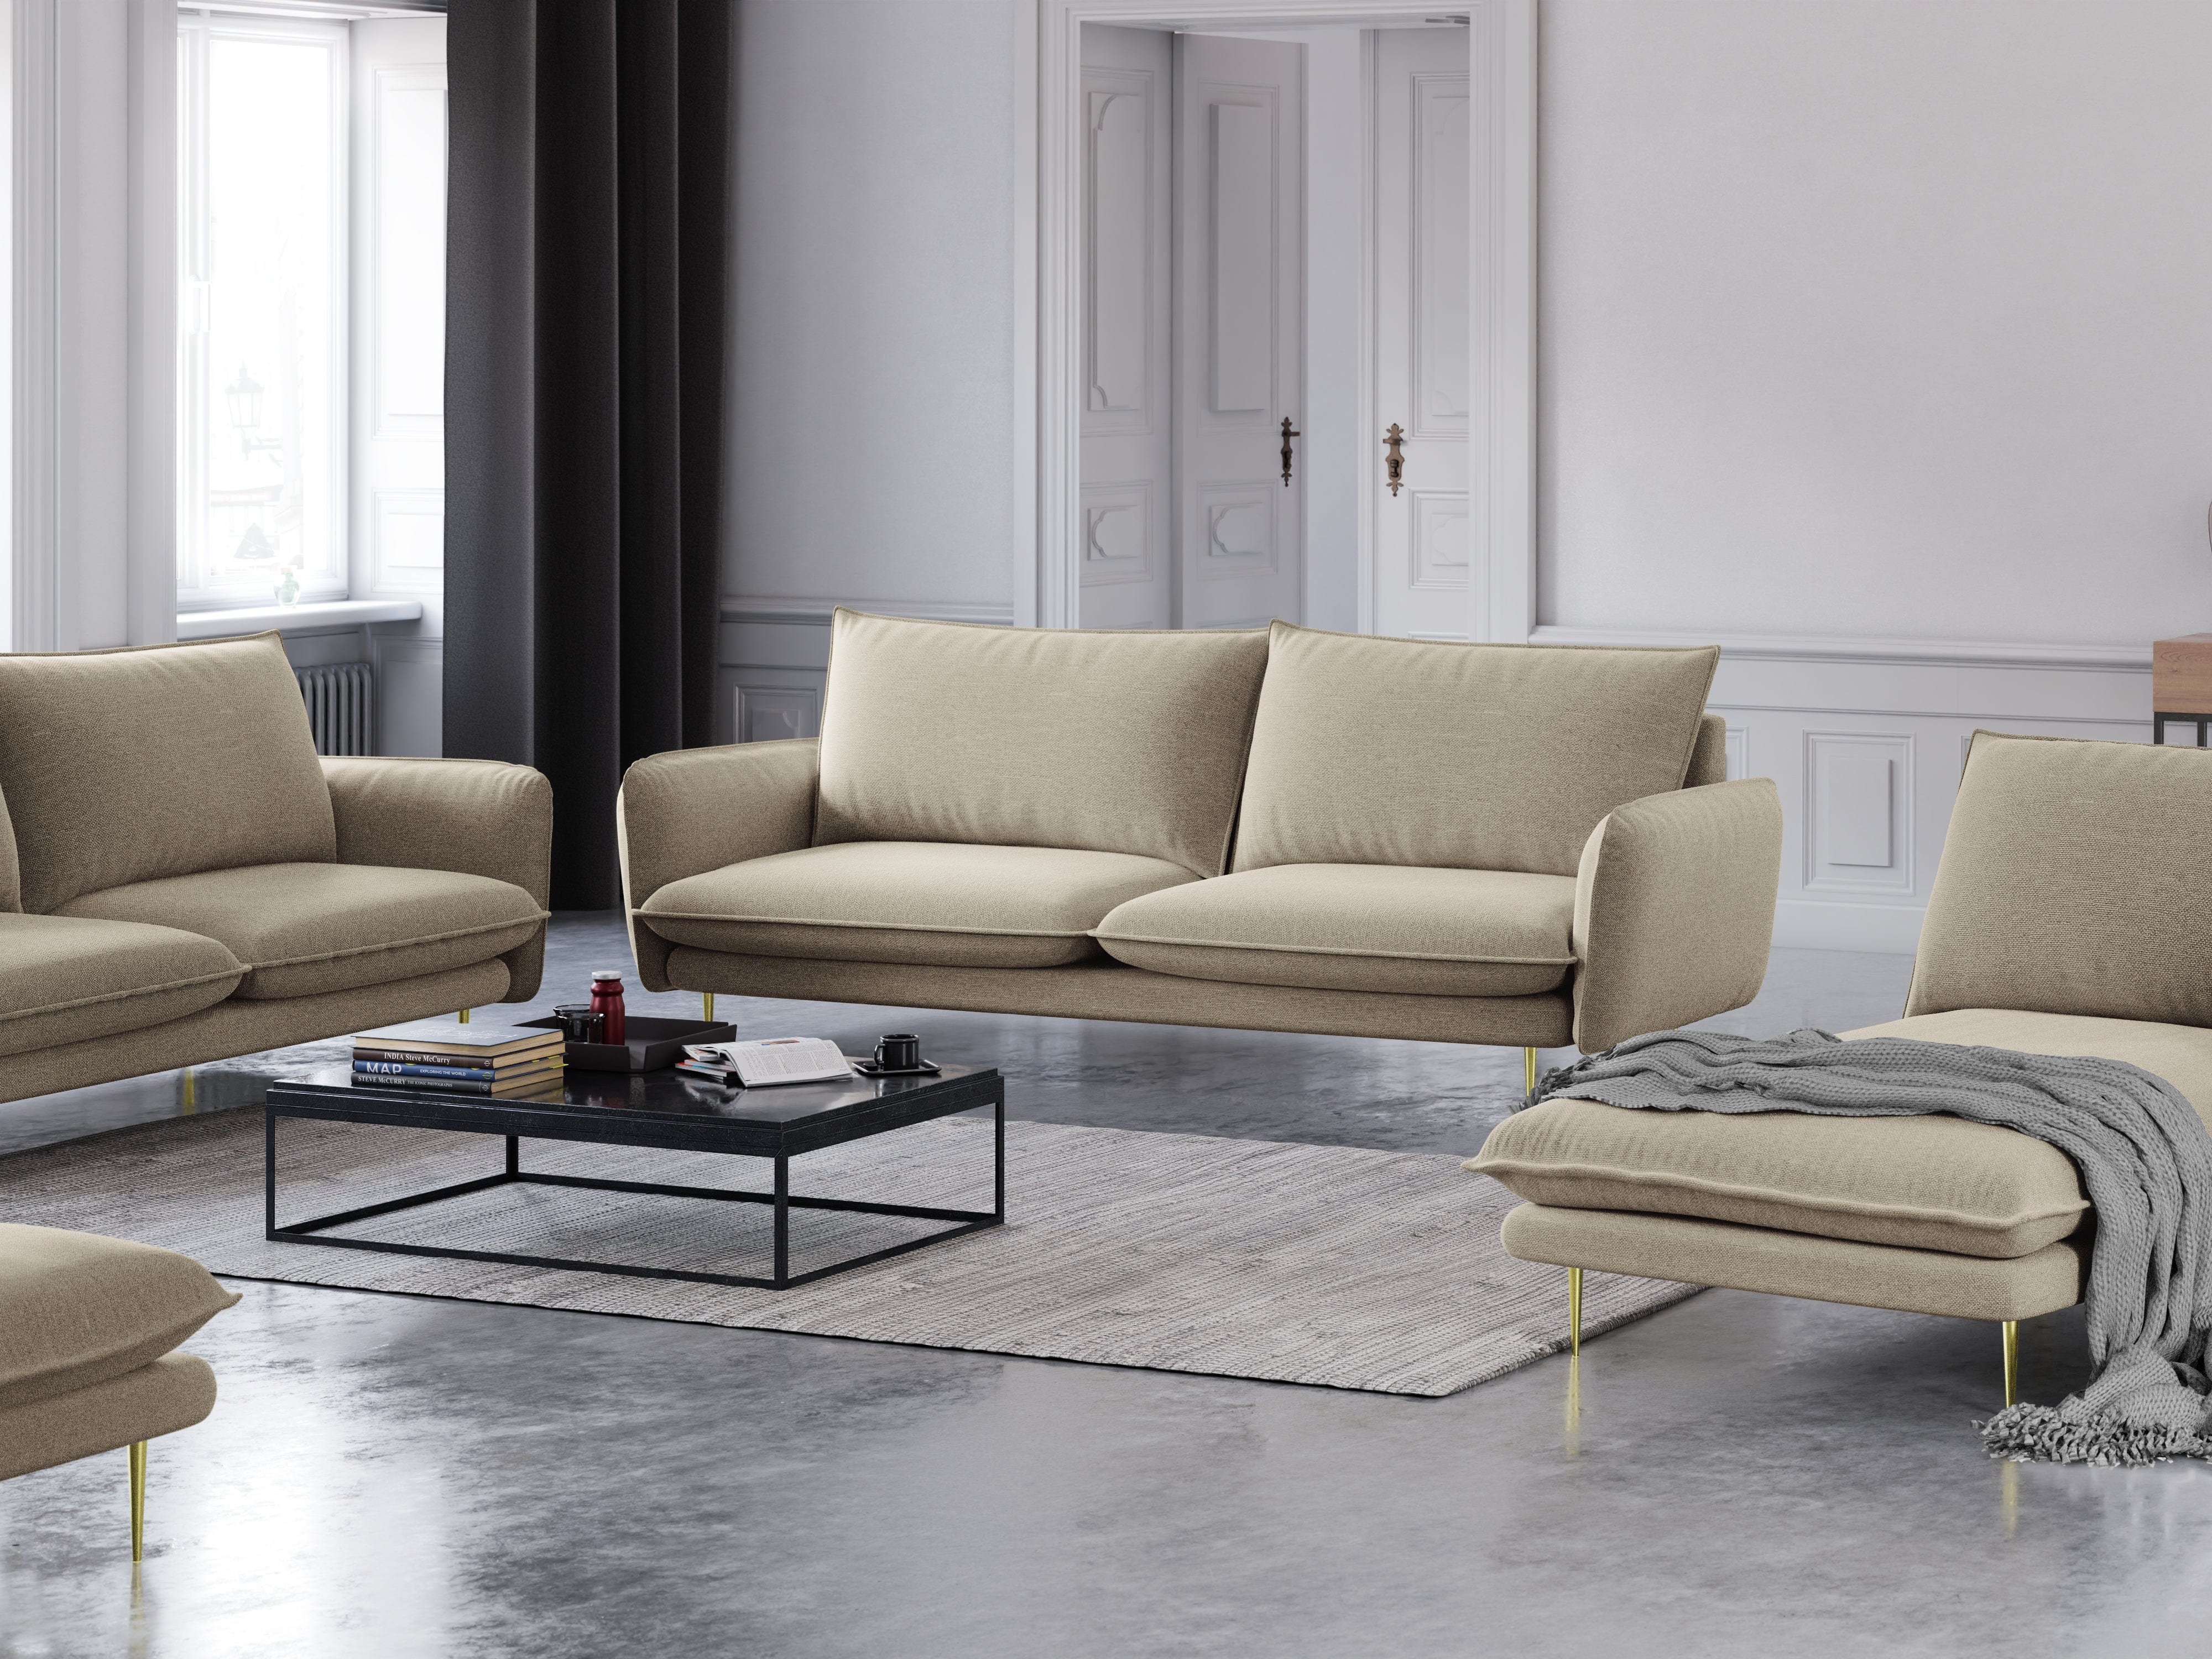 3-seater sofa VIENNA beige with gold base